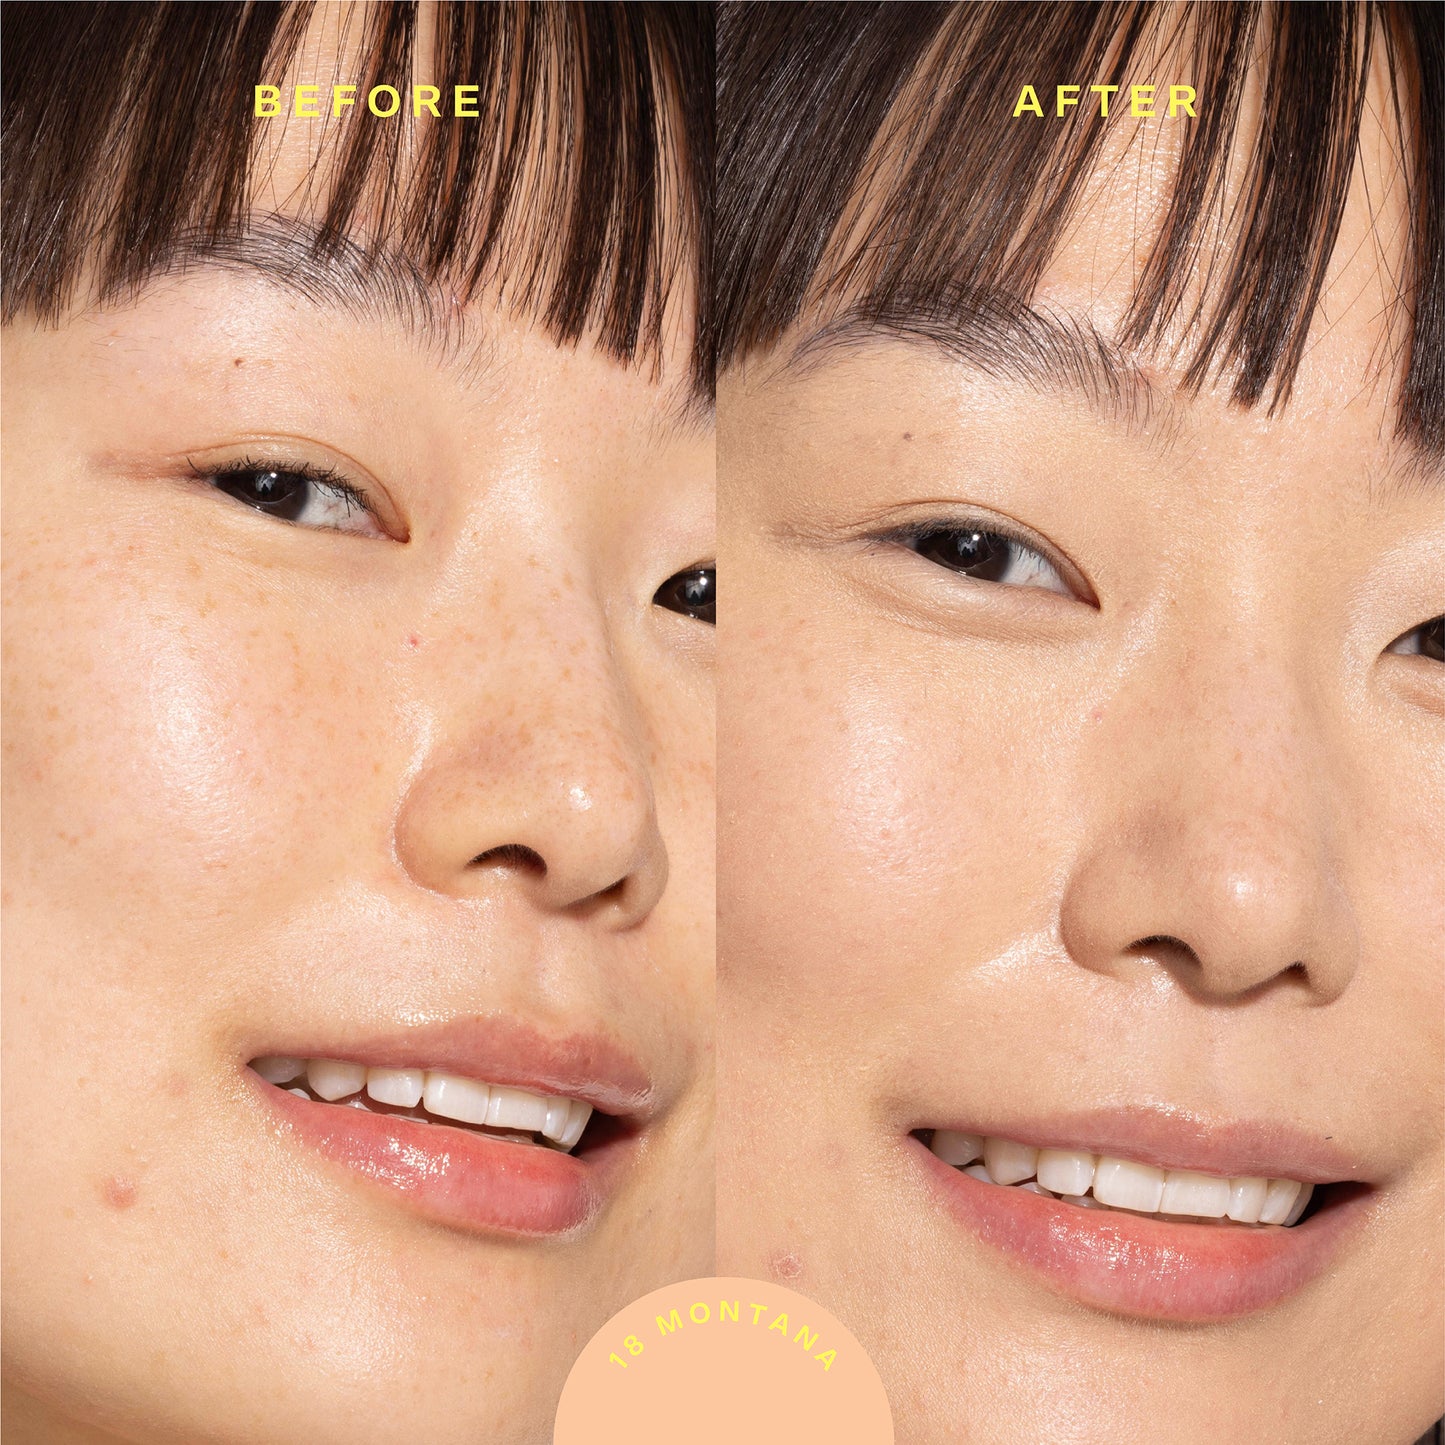 18 Montana [A model before (left image) and after (right image) applyingTower 28 Beauty SunnyDays™ Tinted SPF 30 in the shade 18 Montana]